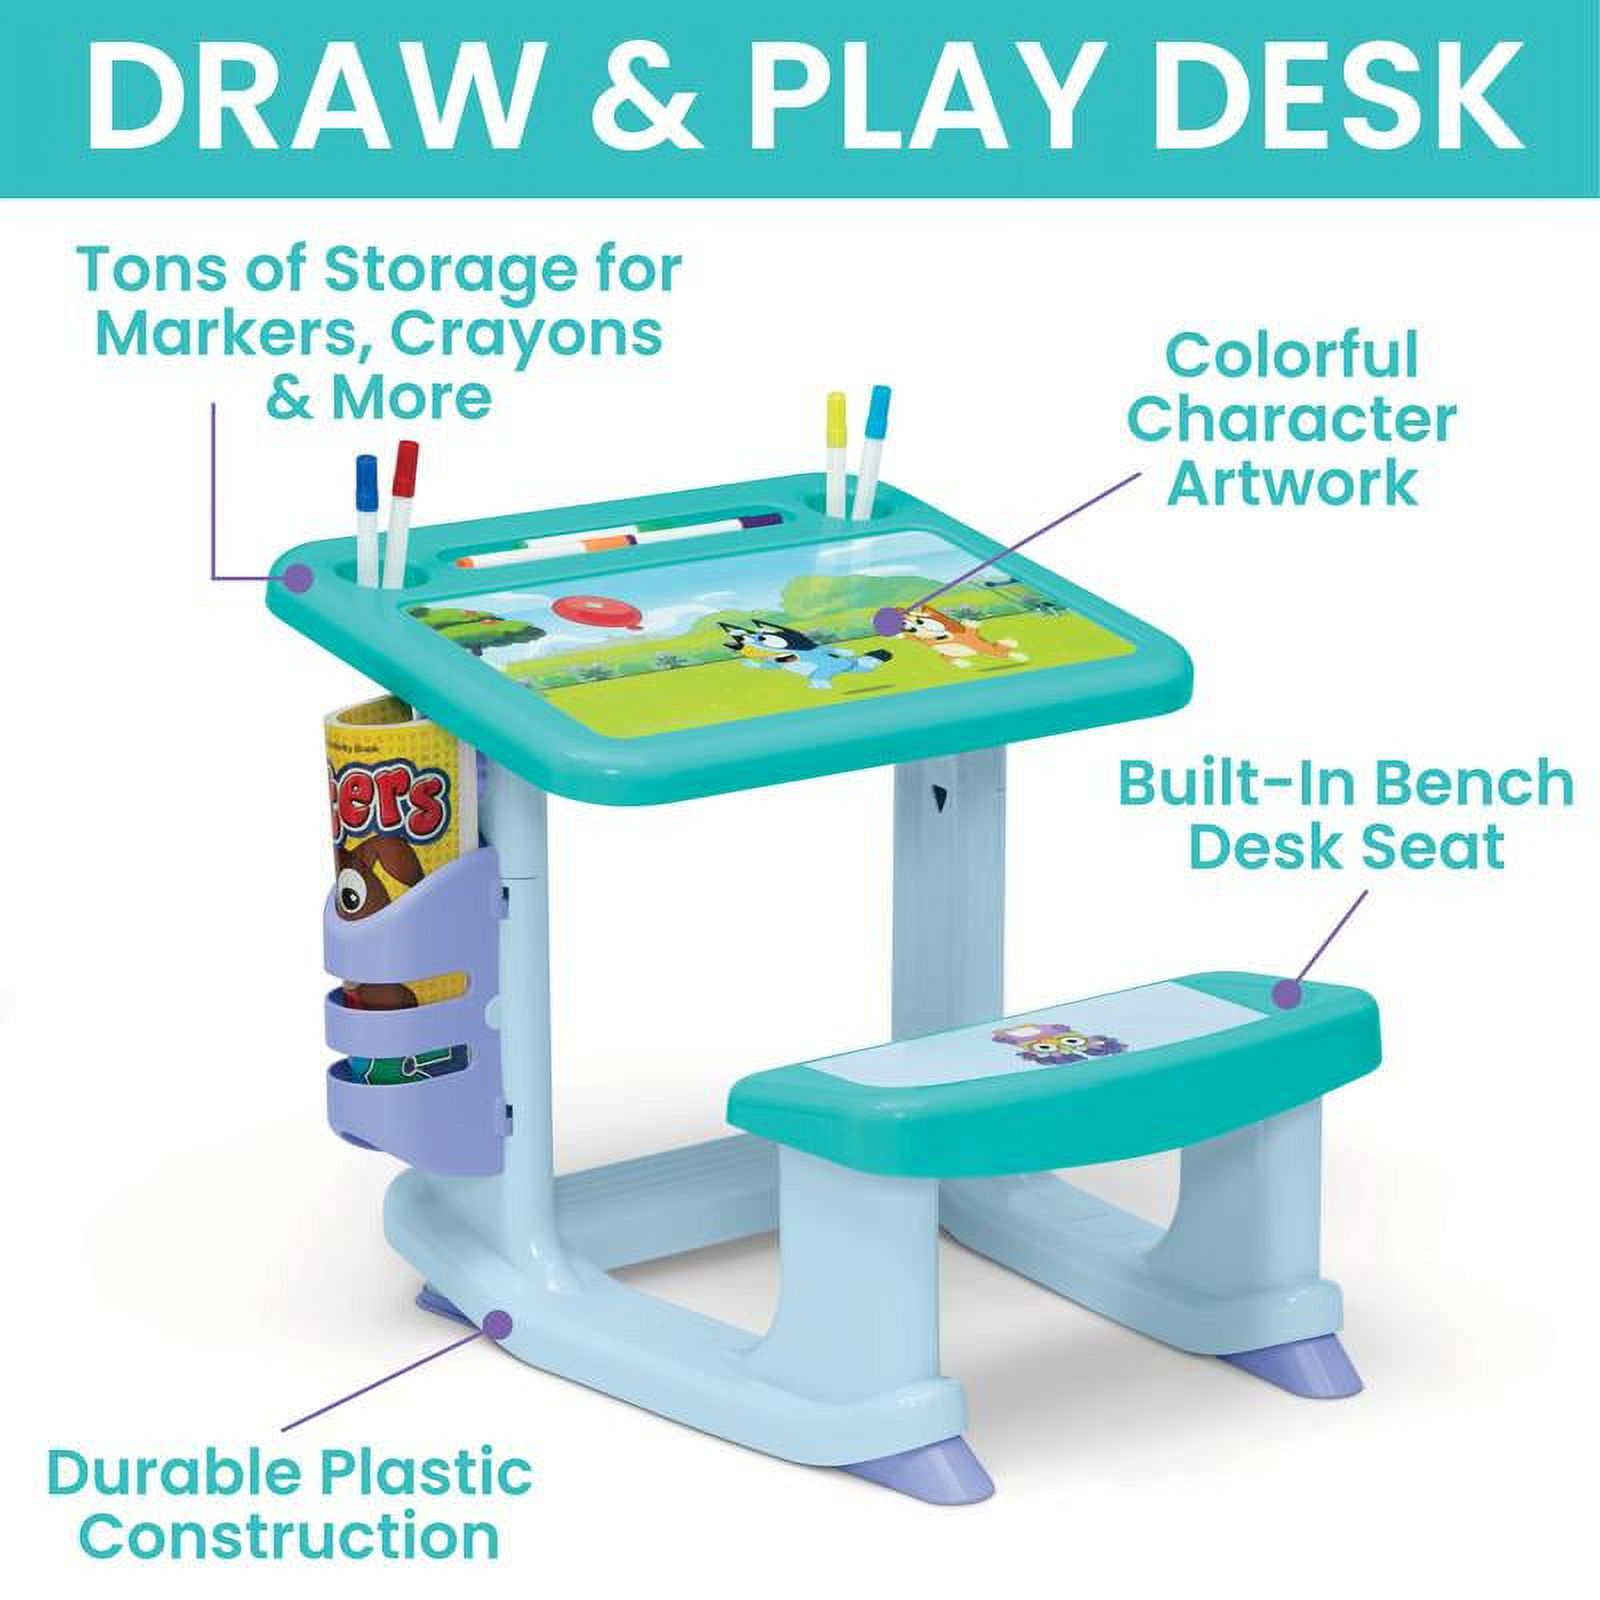 Bluey 3-Piece Art & Play Toddler Room-in-a-Box by Delta Children – Includes Draw & Play Desk, Art & Storage Station & Fabric Toy Box, Blue - image 4 of 11